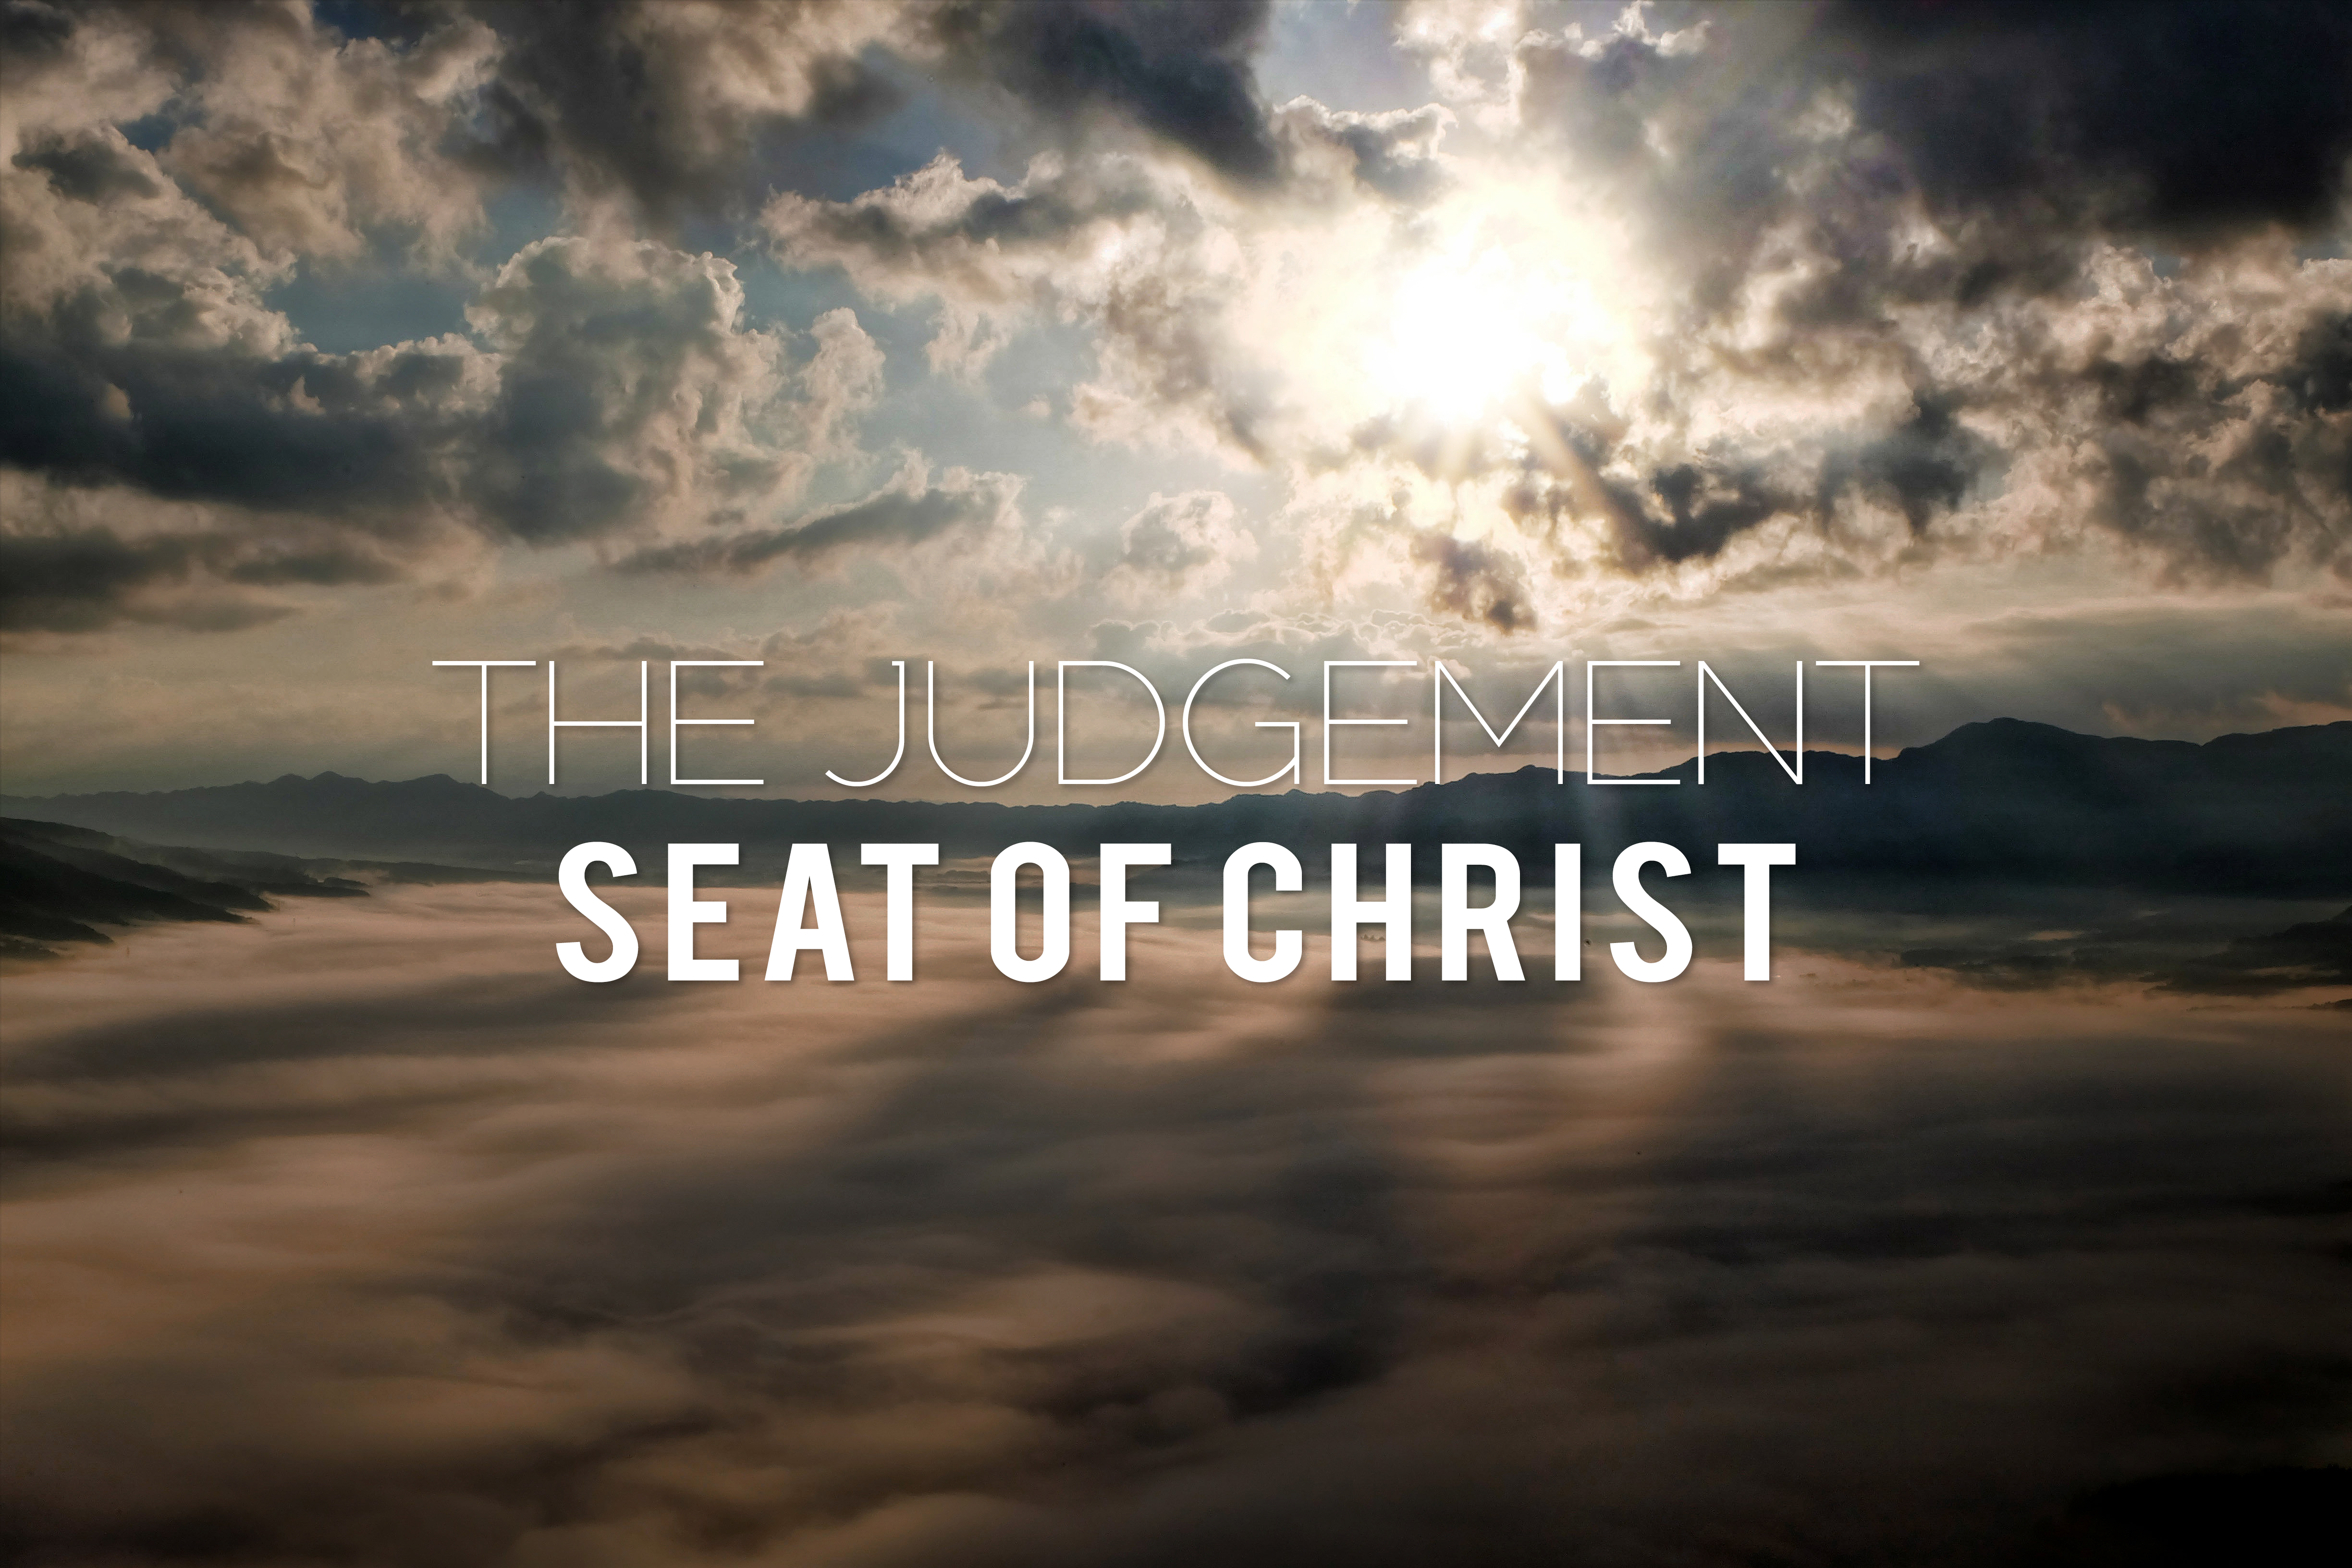 hoyt teaches that the judgment seat of christ